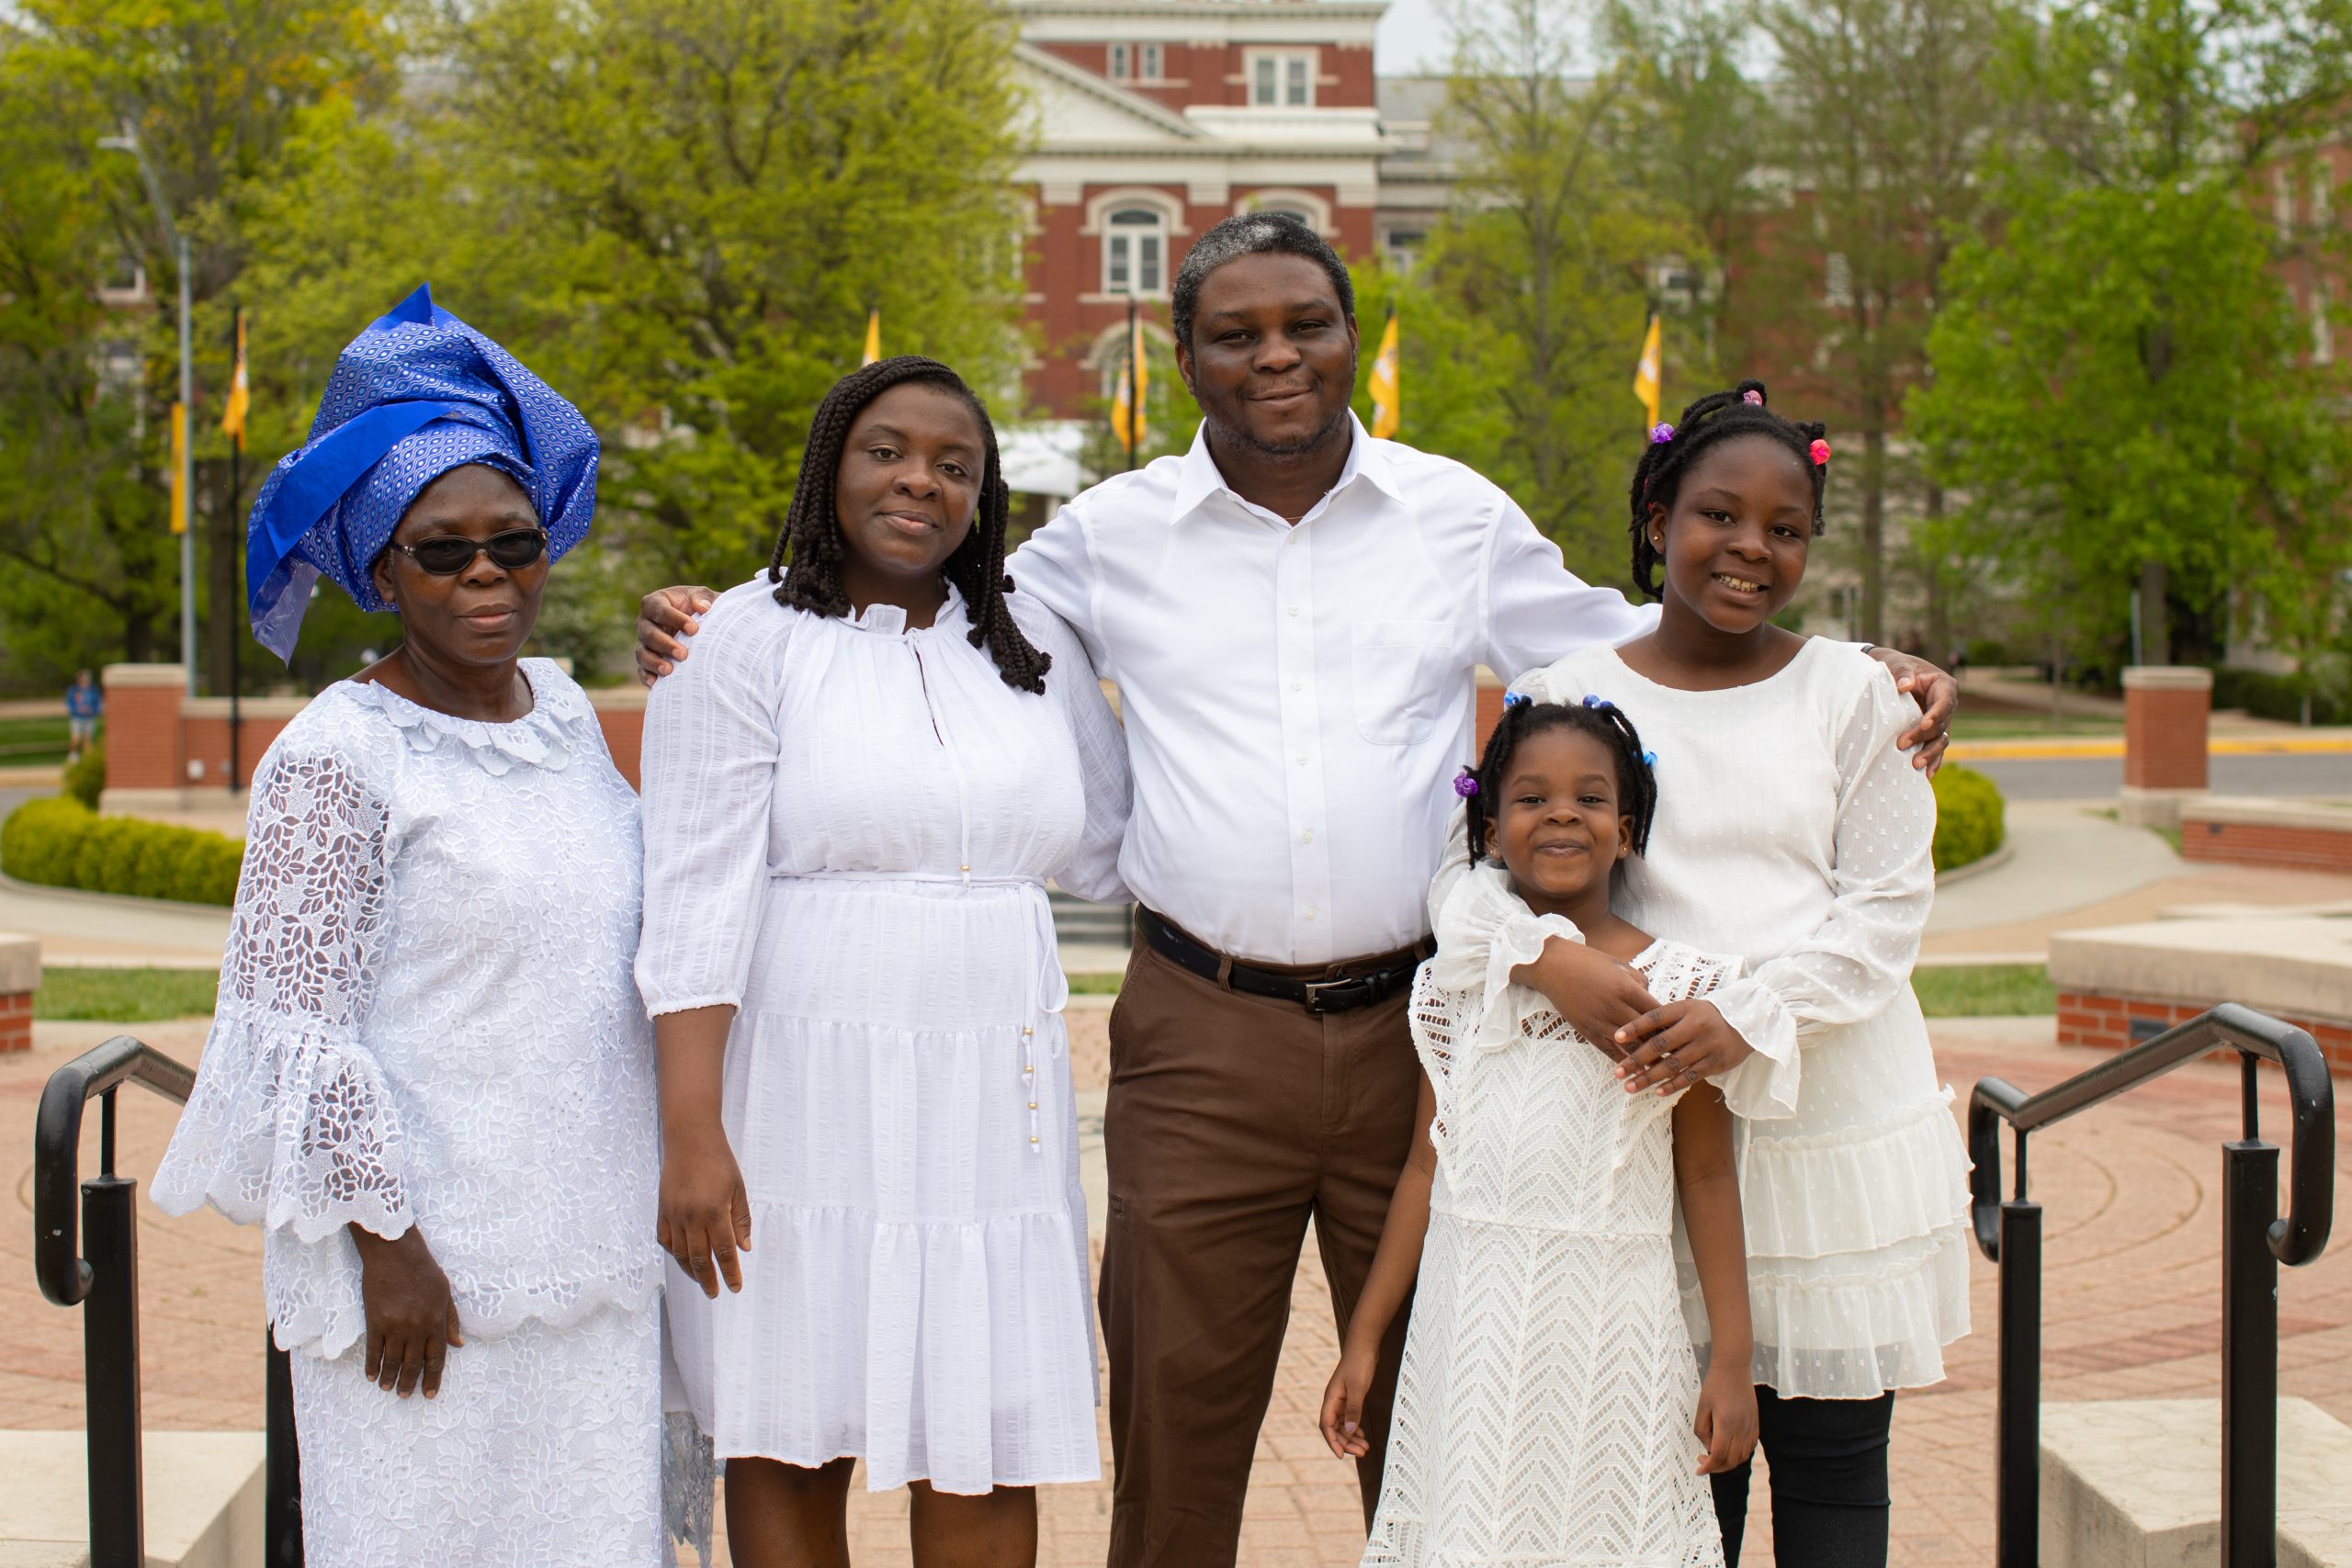 A family poses for a photo on Traditions Plaza at the University of Missouri.